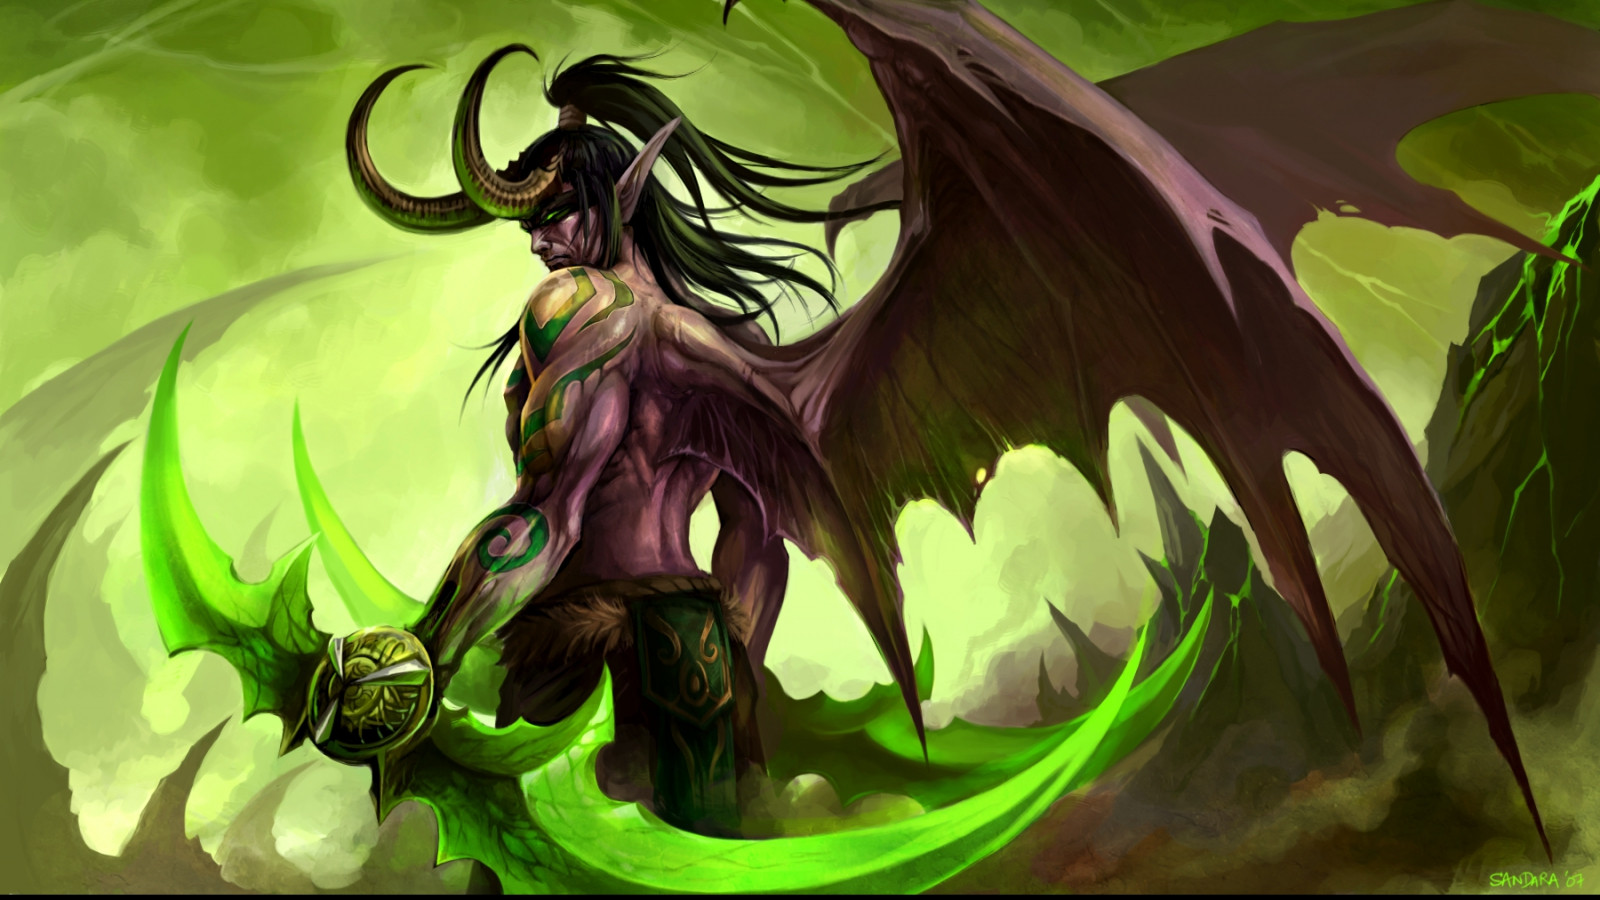 General 1600x900 Illidan Stormrage video games Warcraft World of Warcraft Blizzard Entertainment video game characters